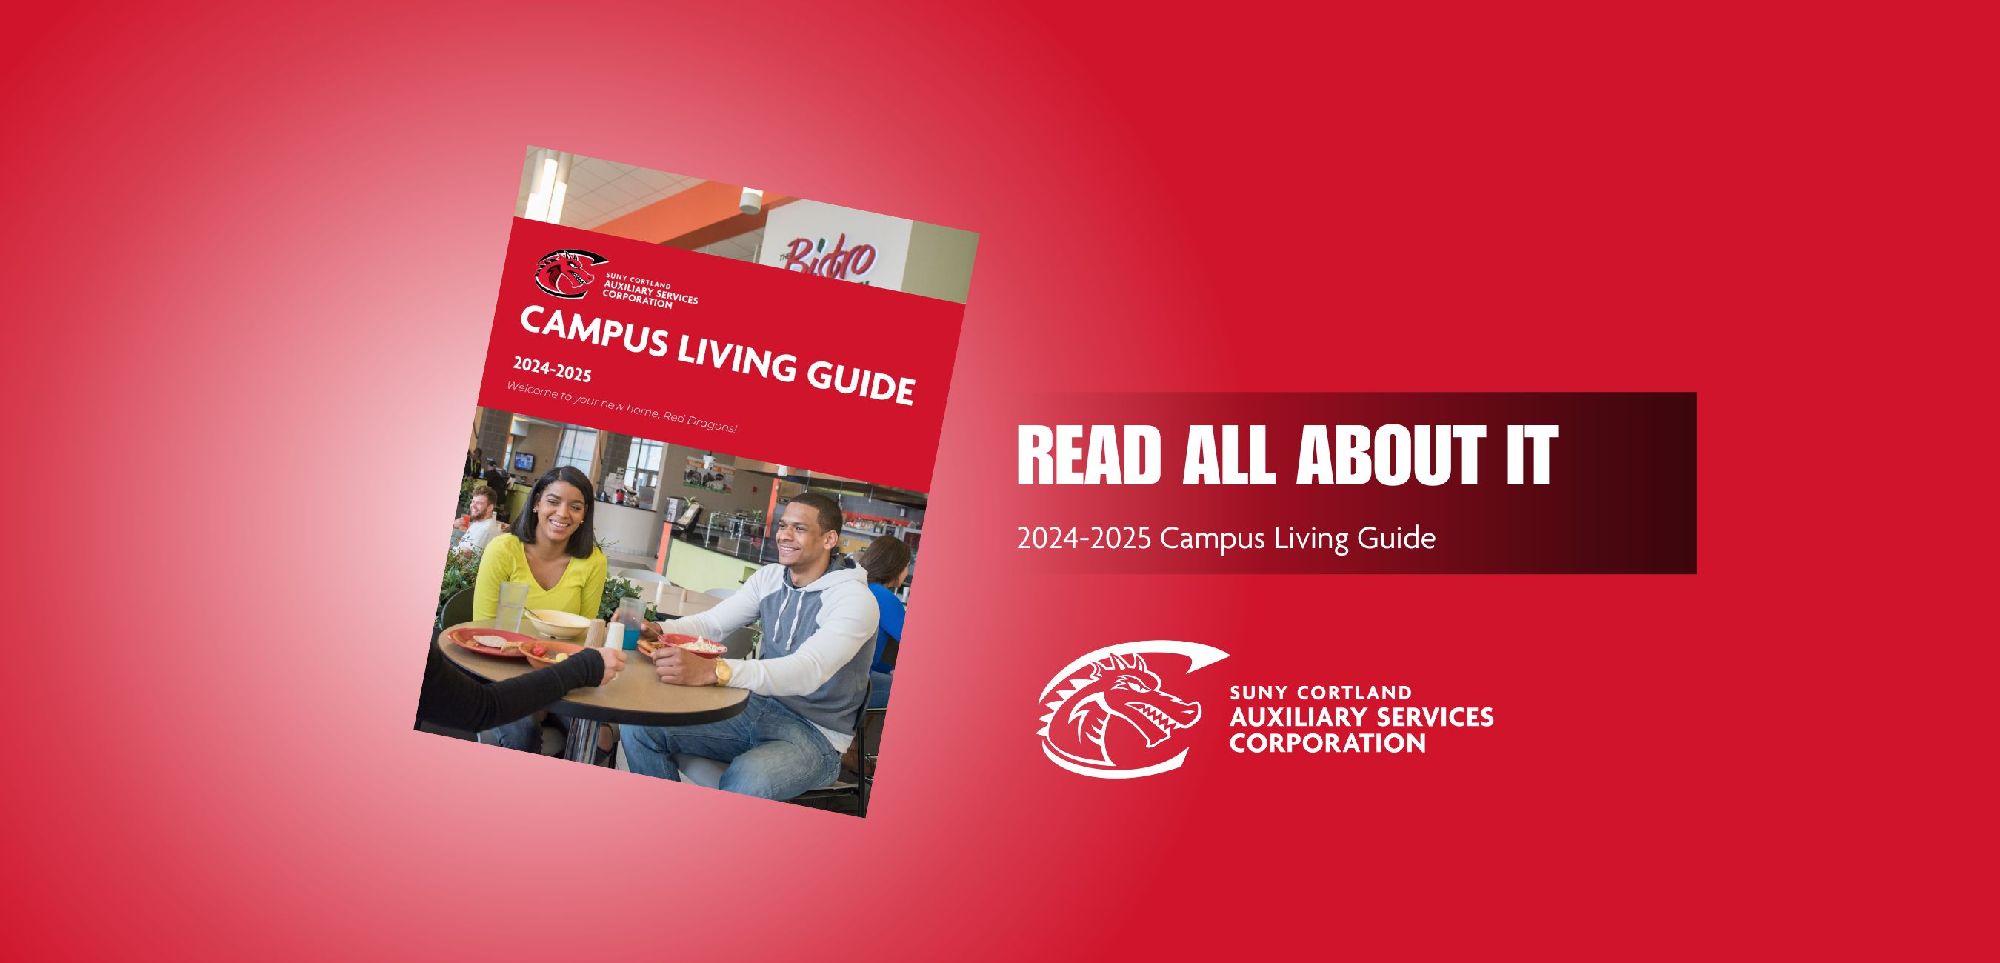 Check out the Campus Living Guide